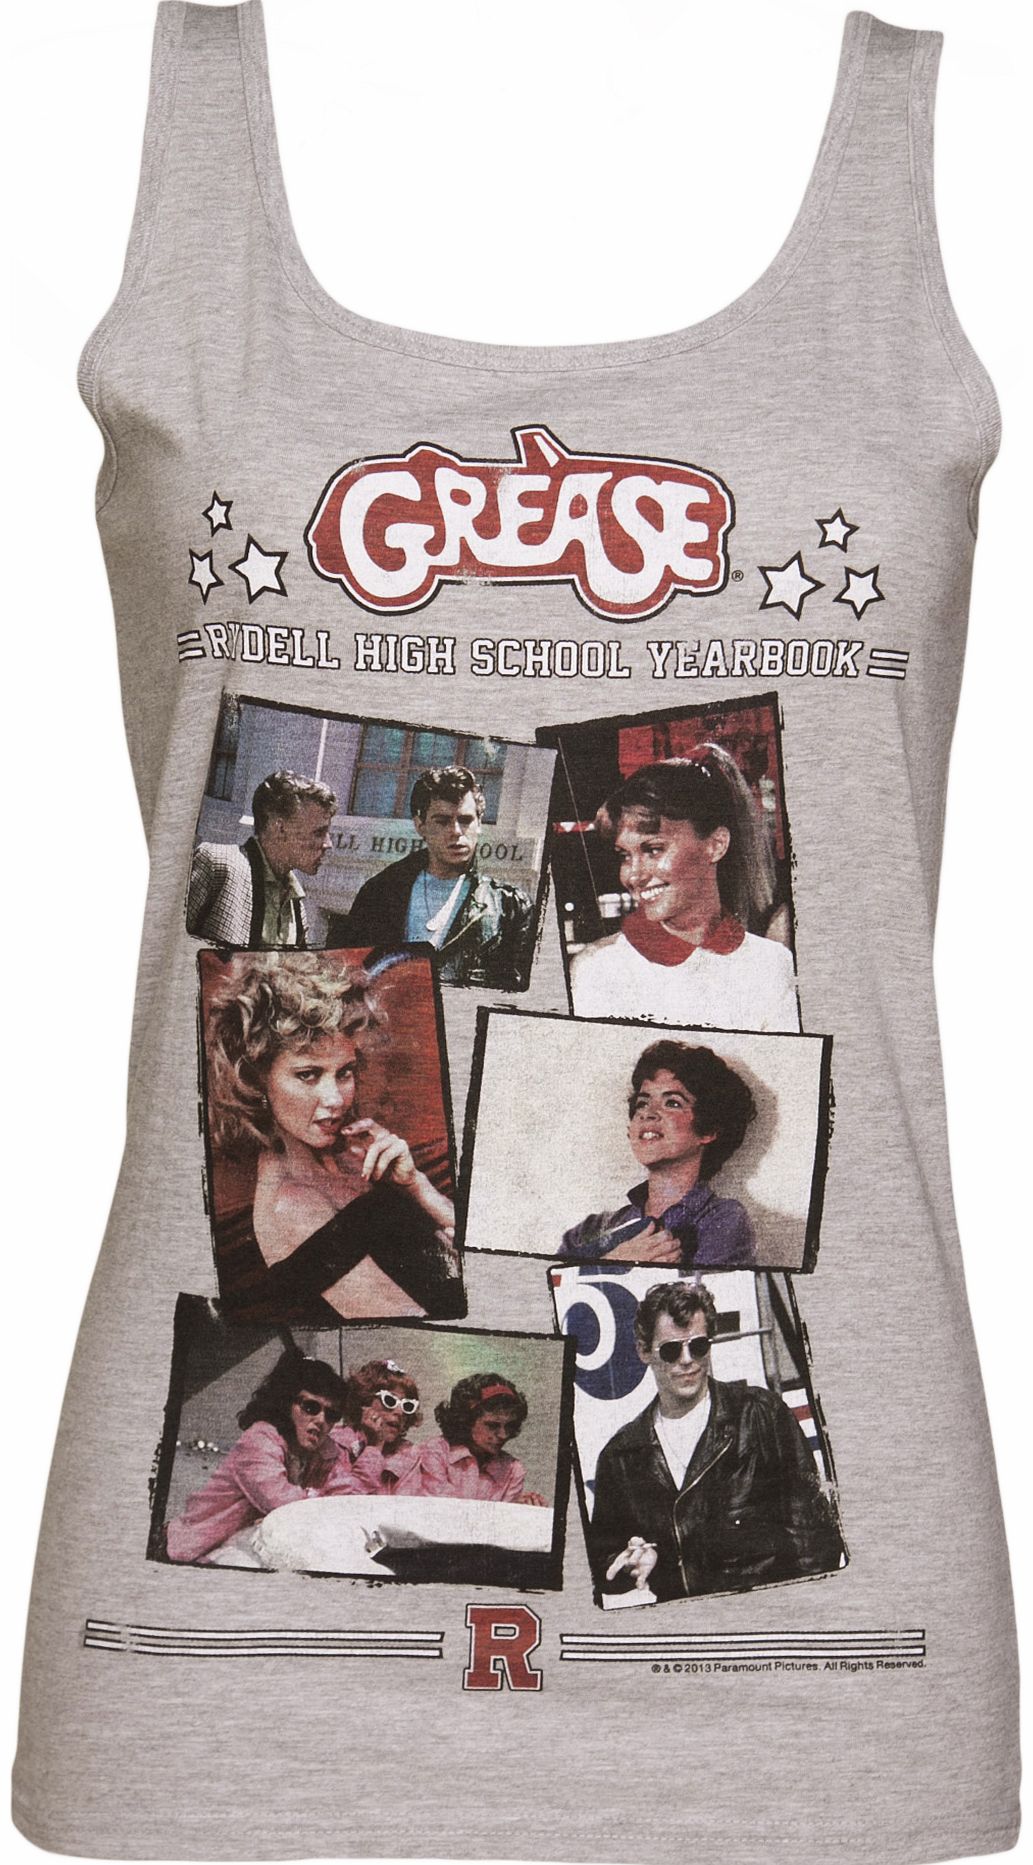 Ladies Grease Rydell High Yearbook Tank Vest